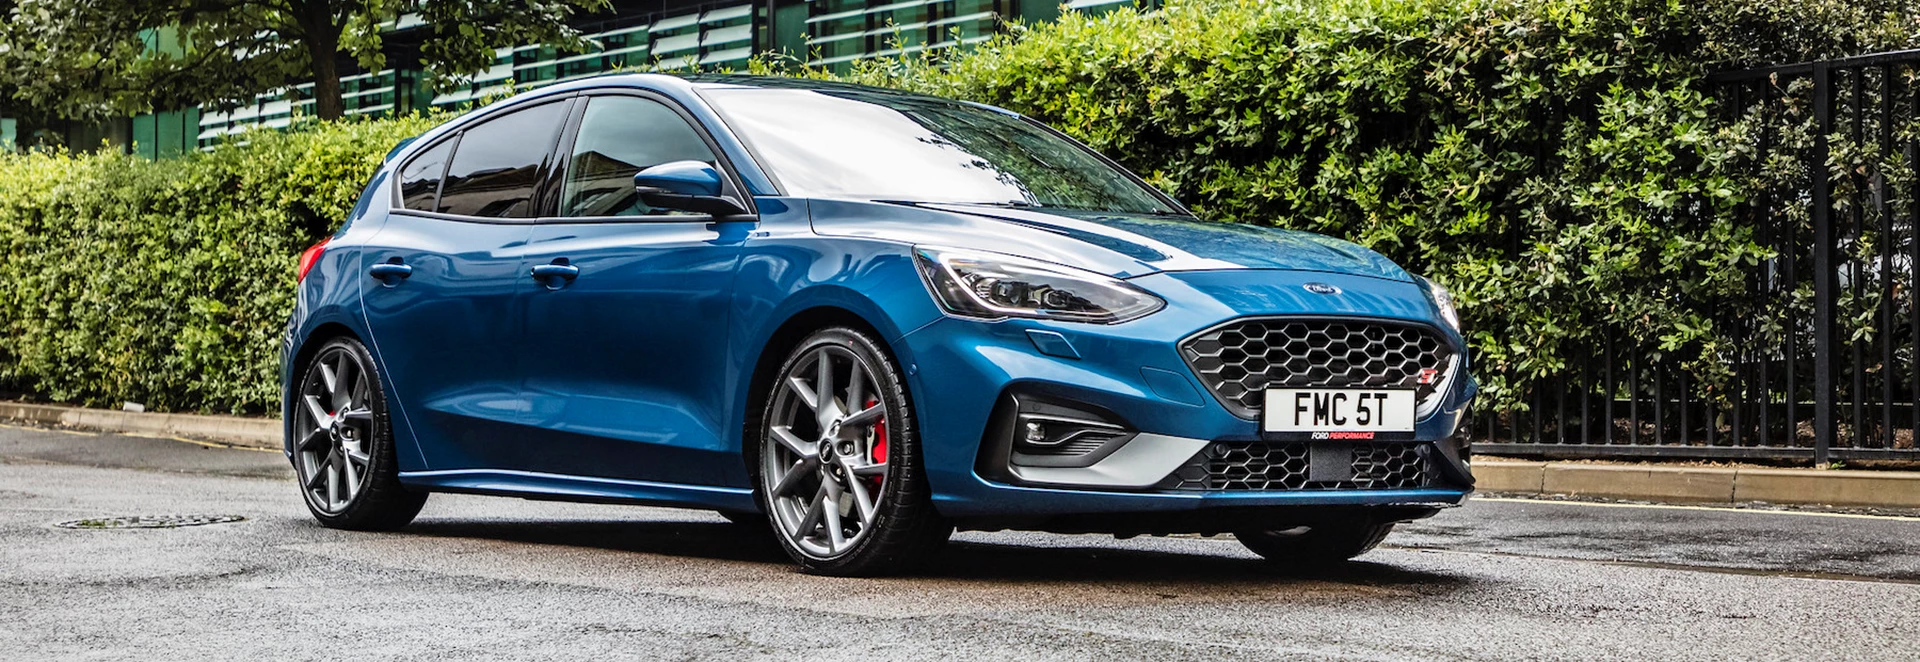 Sporty Ford Focus ST gains new automatic gearbox option 